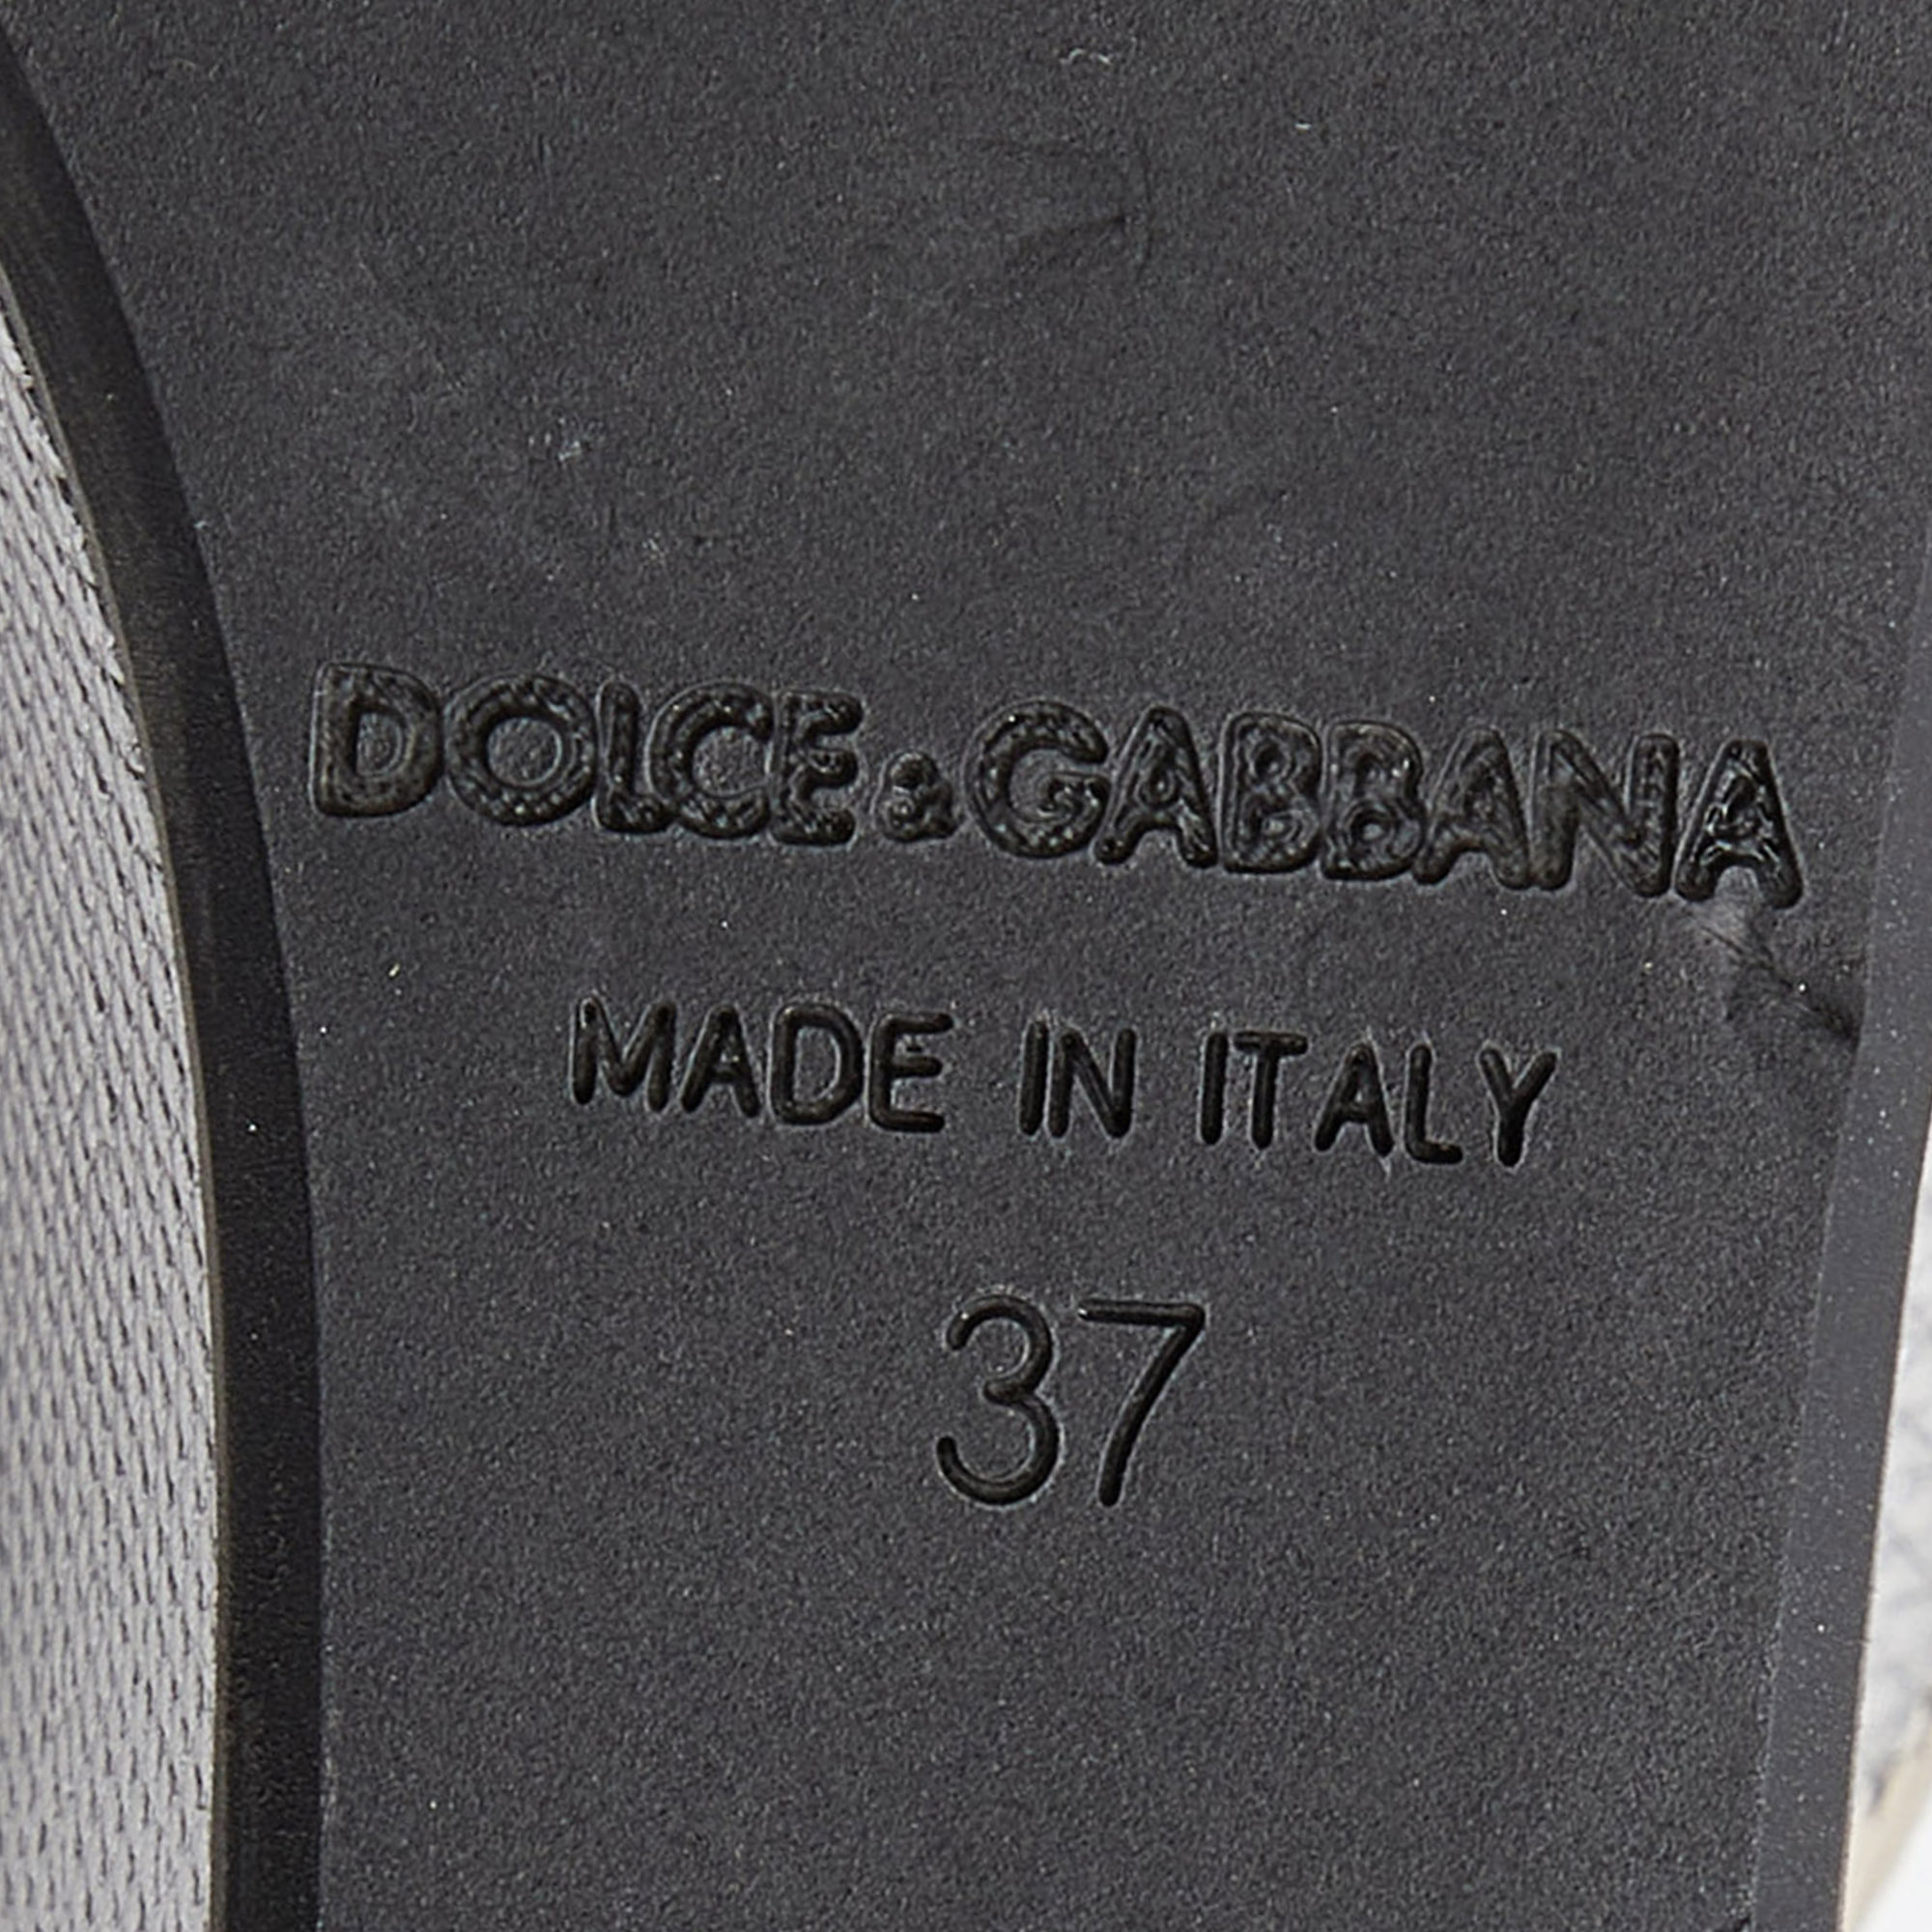 Dolce & Gabbana Silver Embossed Lizard Leather Peep Toe Mules Size 37